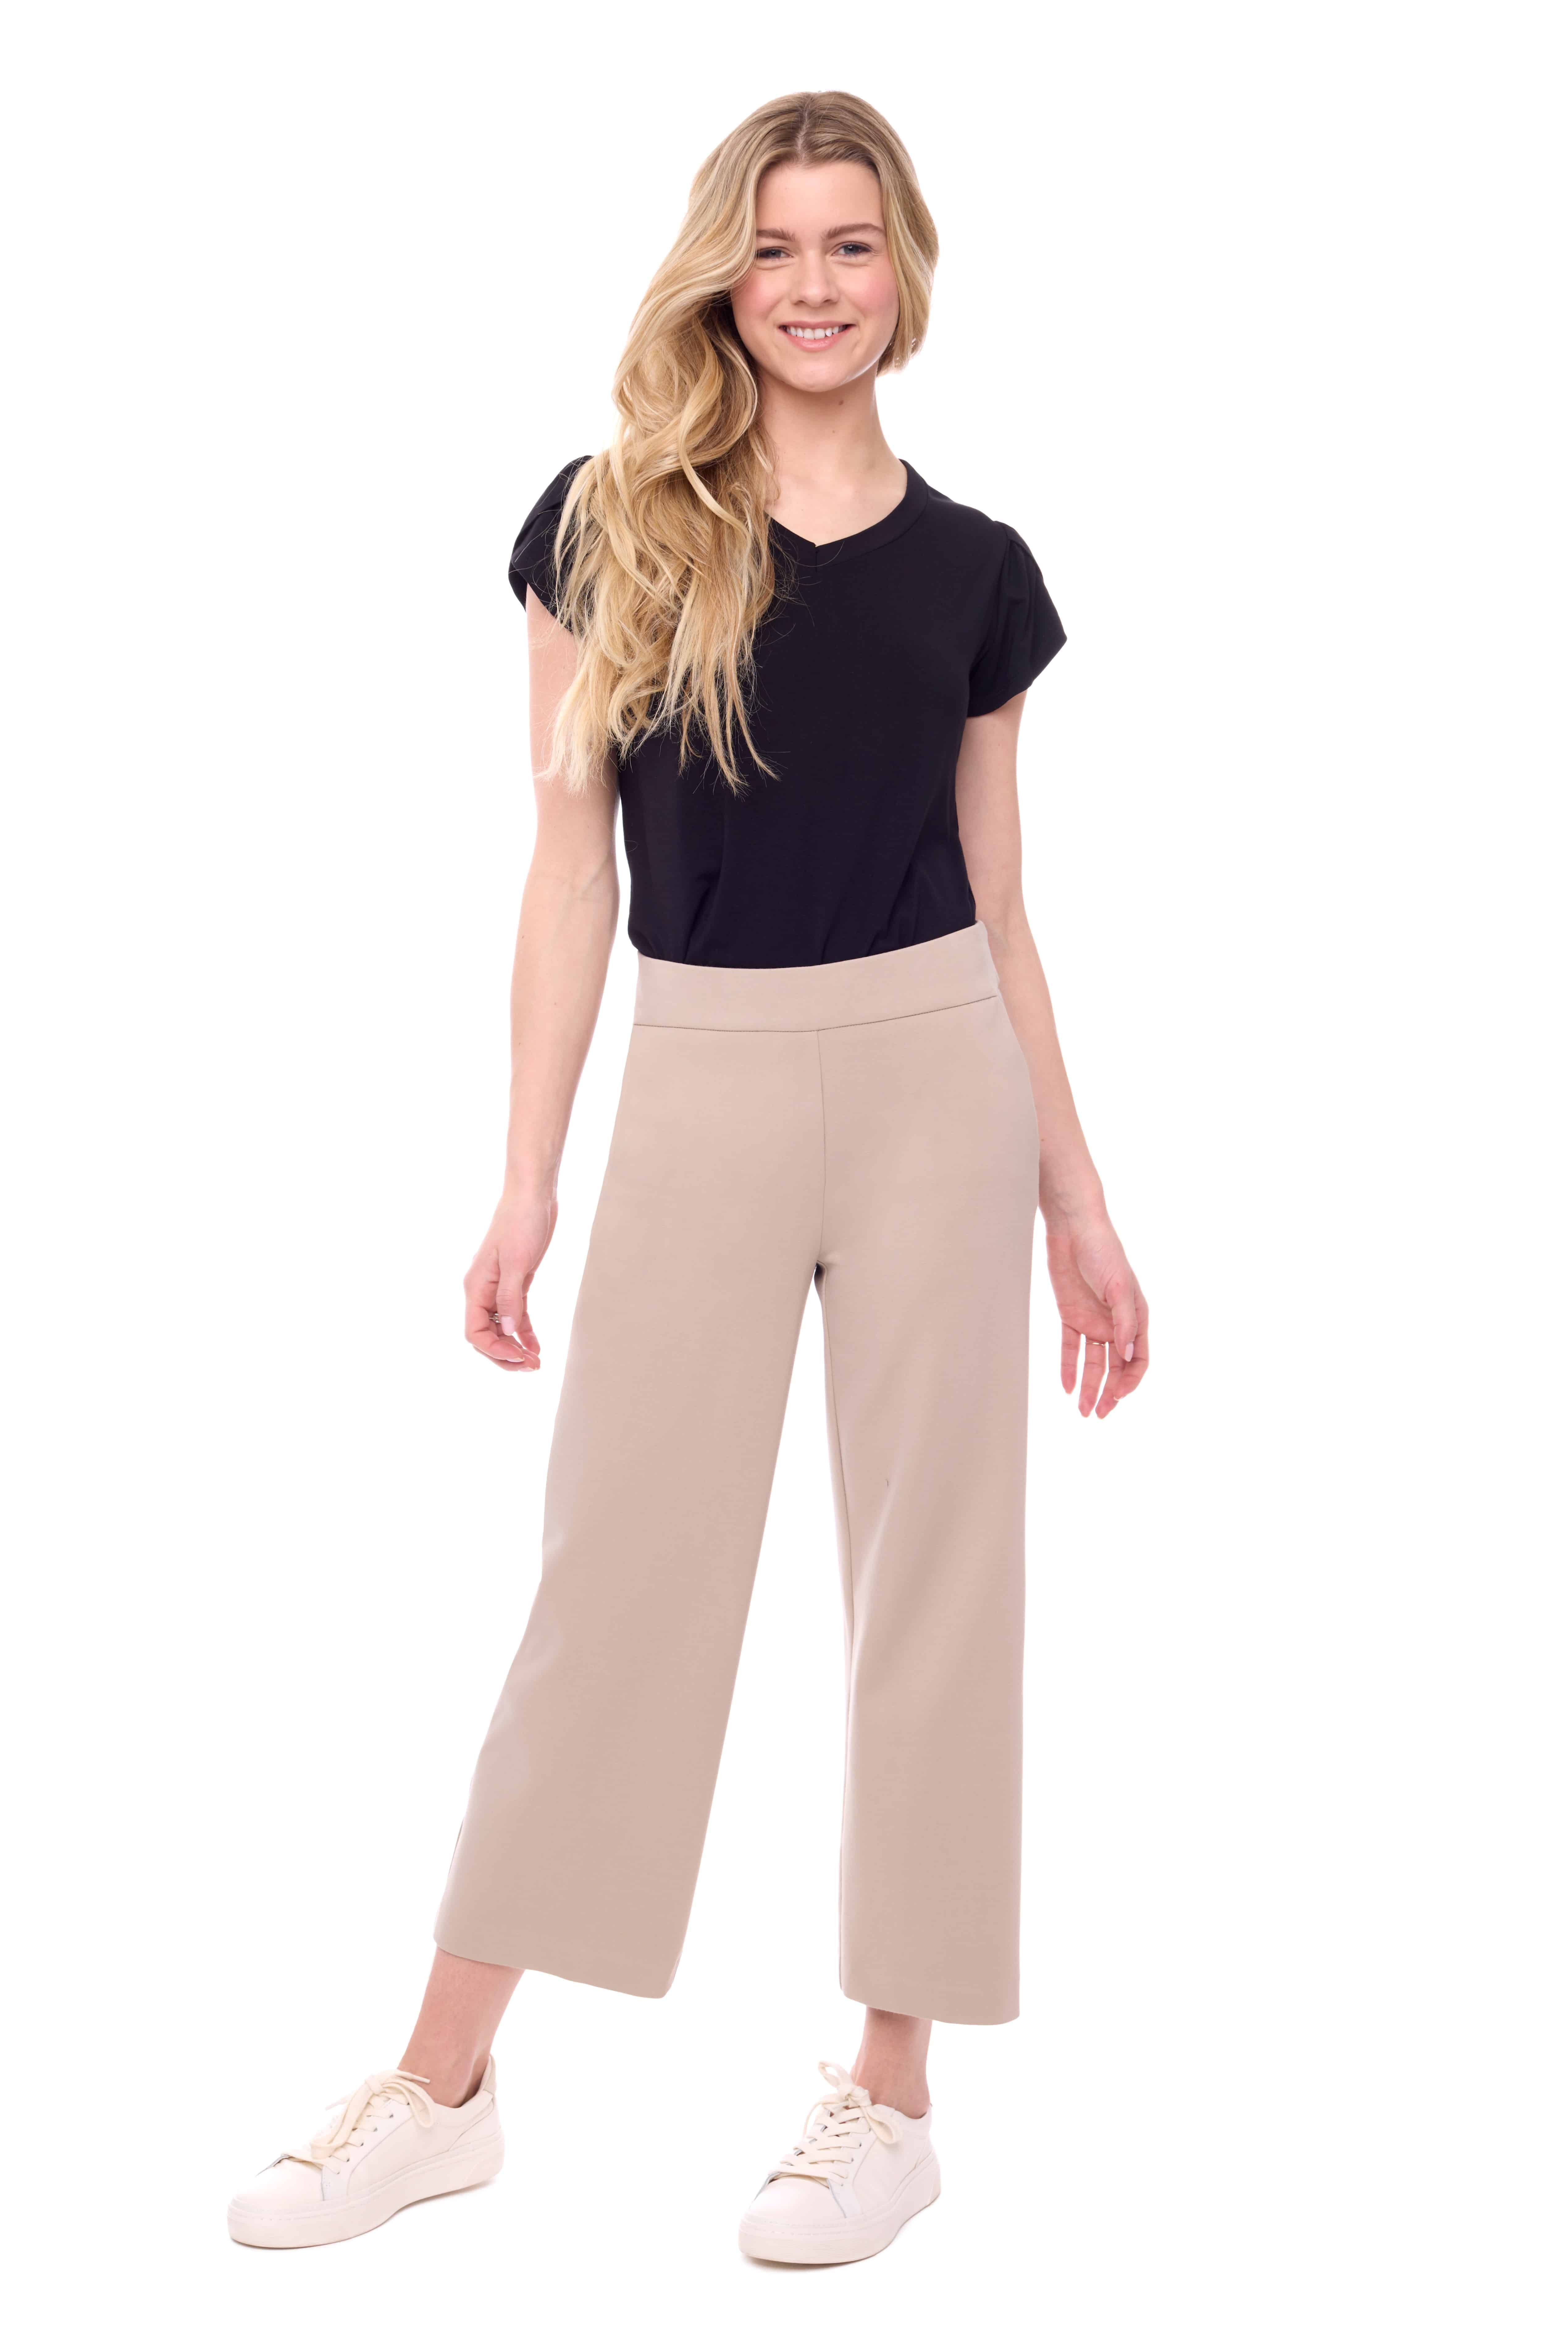 Buy Solid Ponte Pants with Buttons